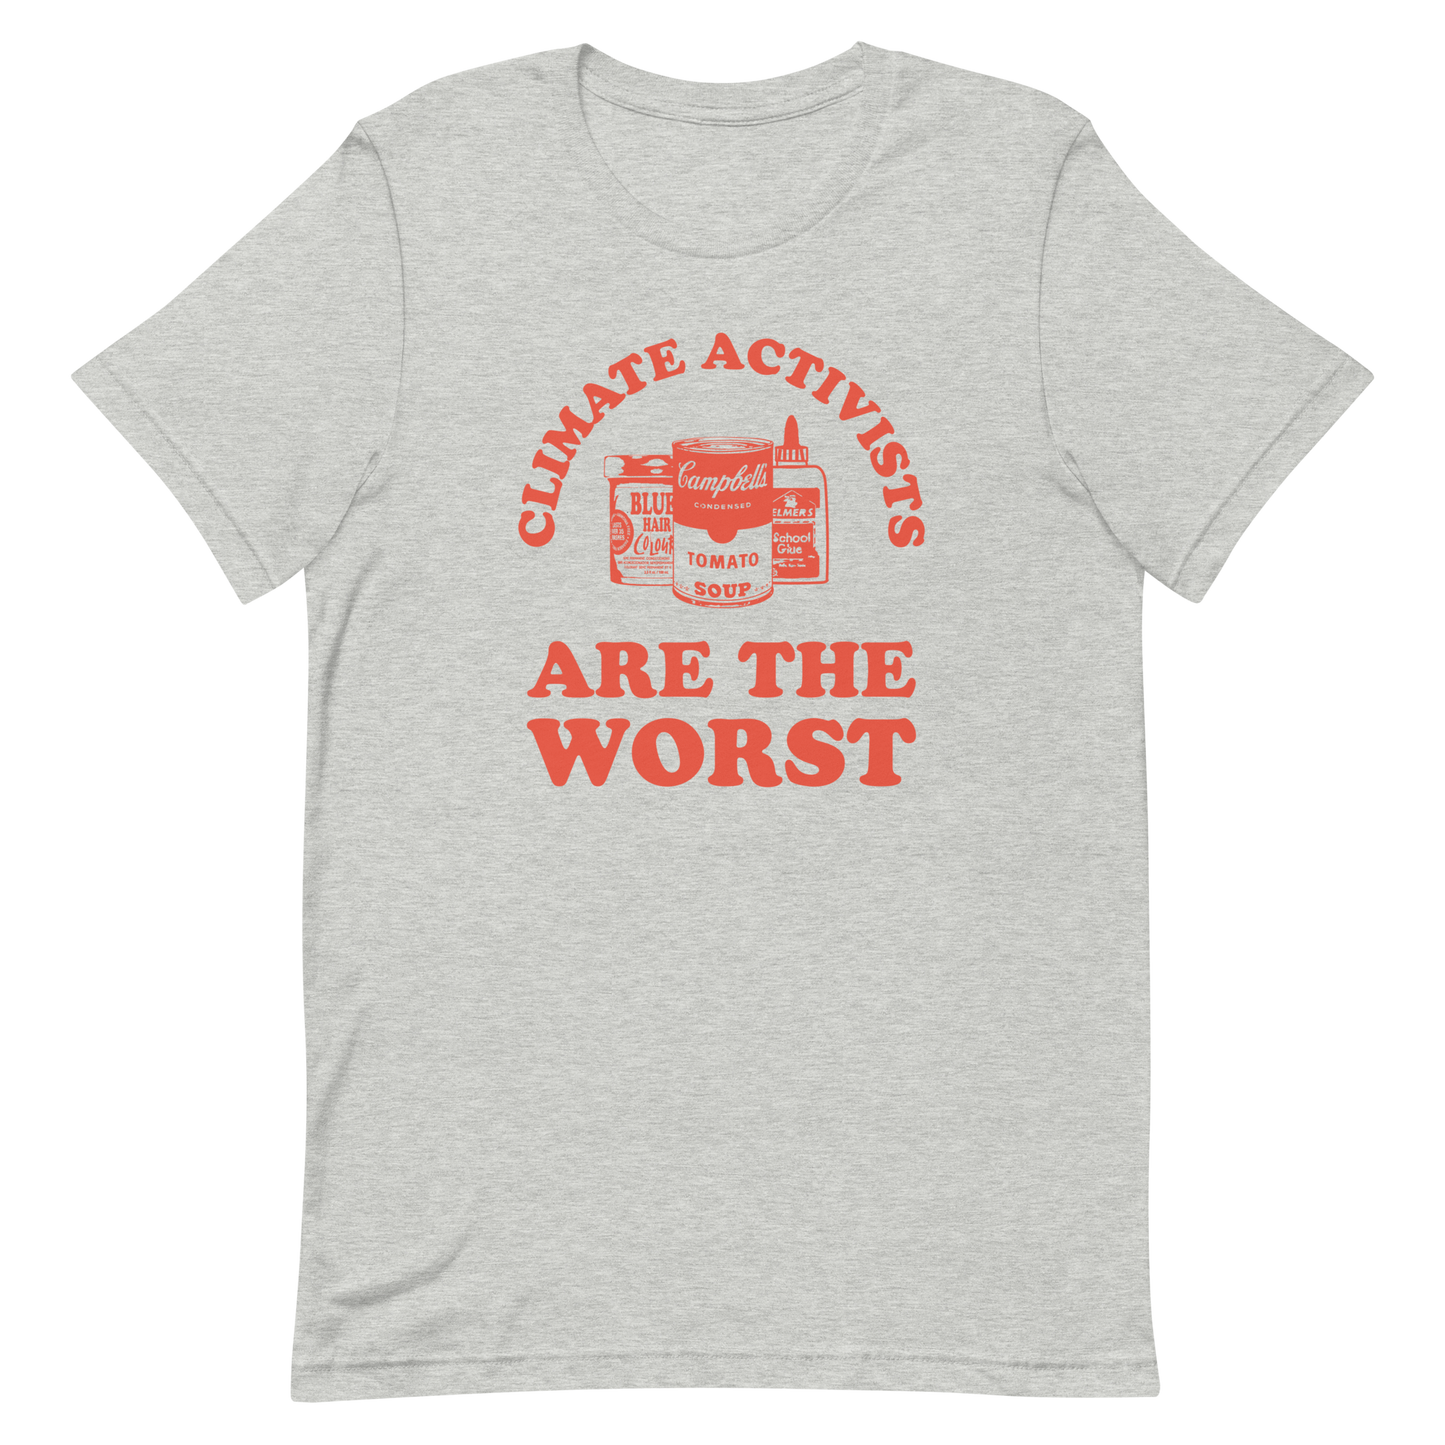 Climate Activists Are The Worst T-shirt